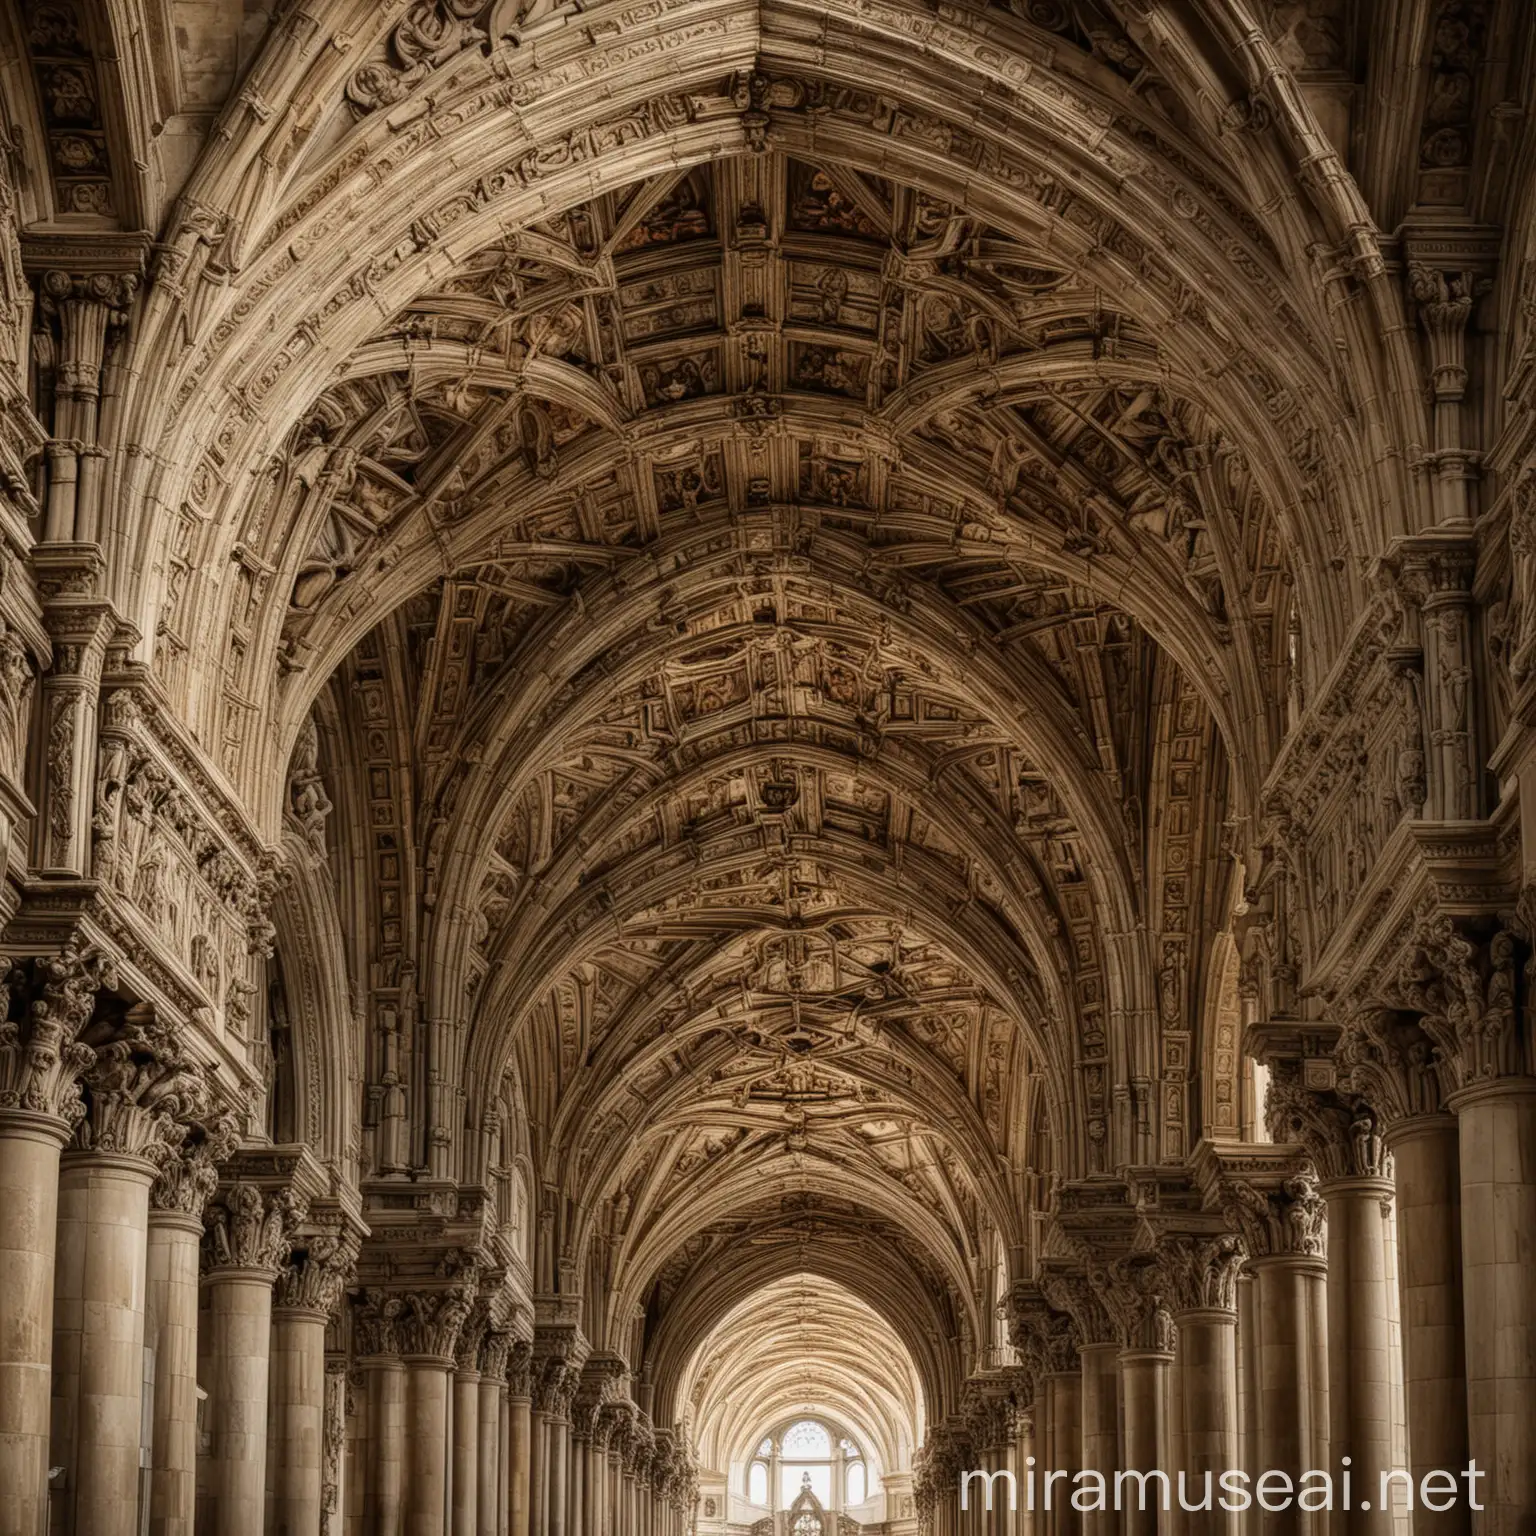 Capture the intricate details of Renaissance architecture, including grand cathedrals, palaces, and bridges. Focus on elements like arches, columns, domes, and ornate facades.